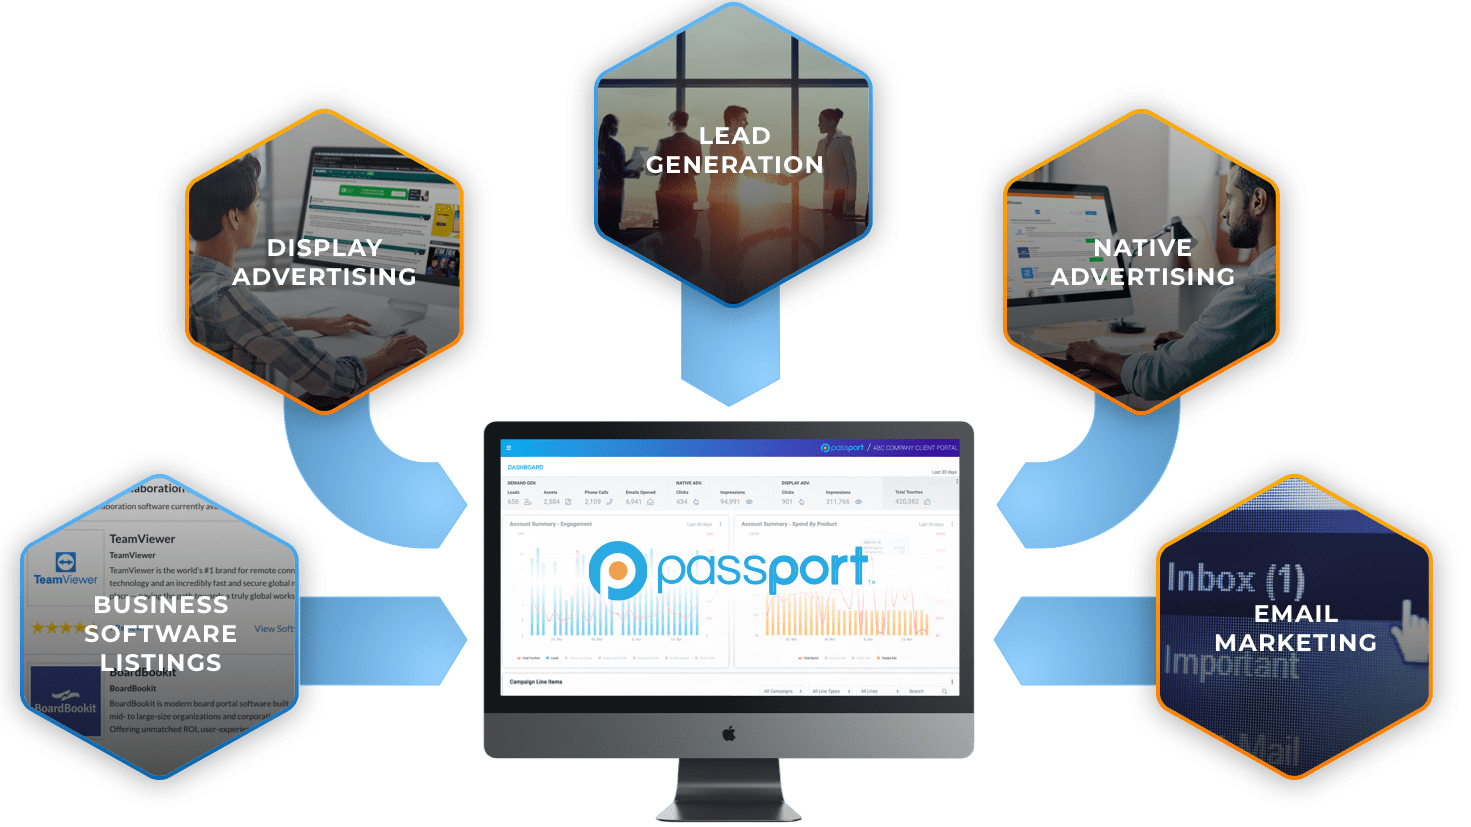 Passport integrates all your display advertising, lead generation, native advertising, email marketing and business software listing campaigns.